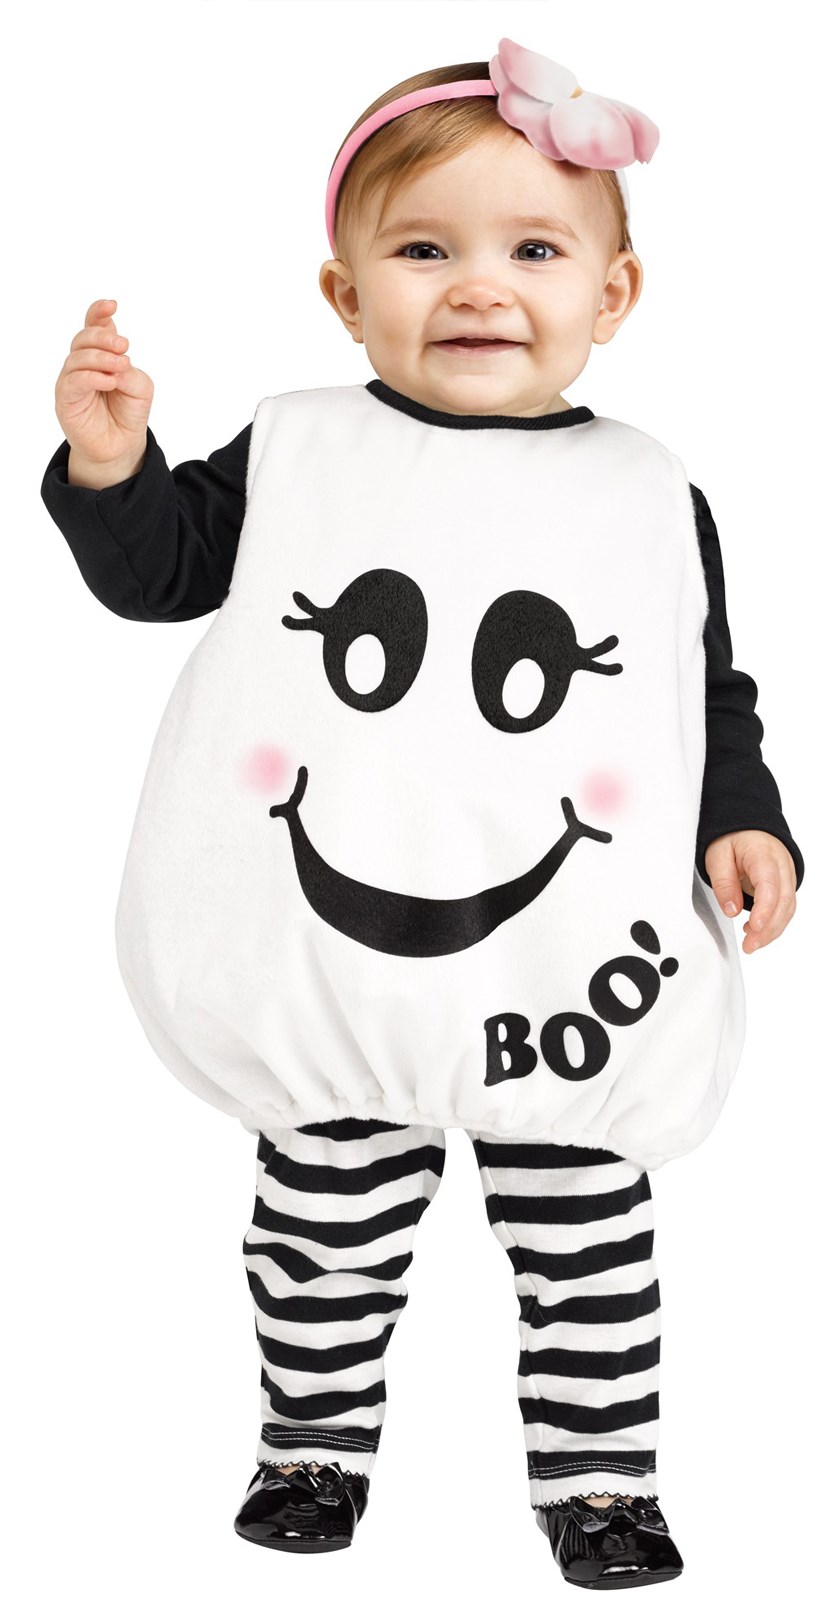 Baby Boo Costume For Toddlers